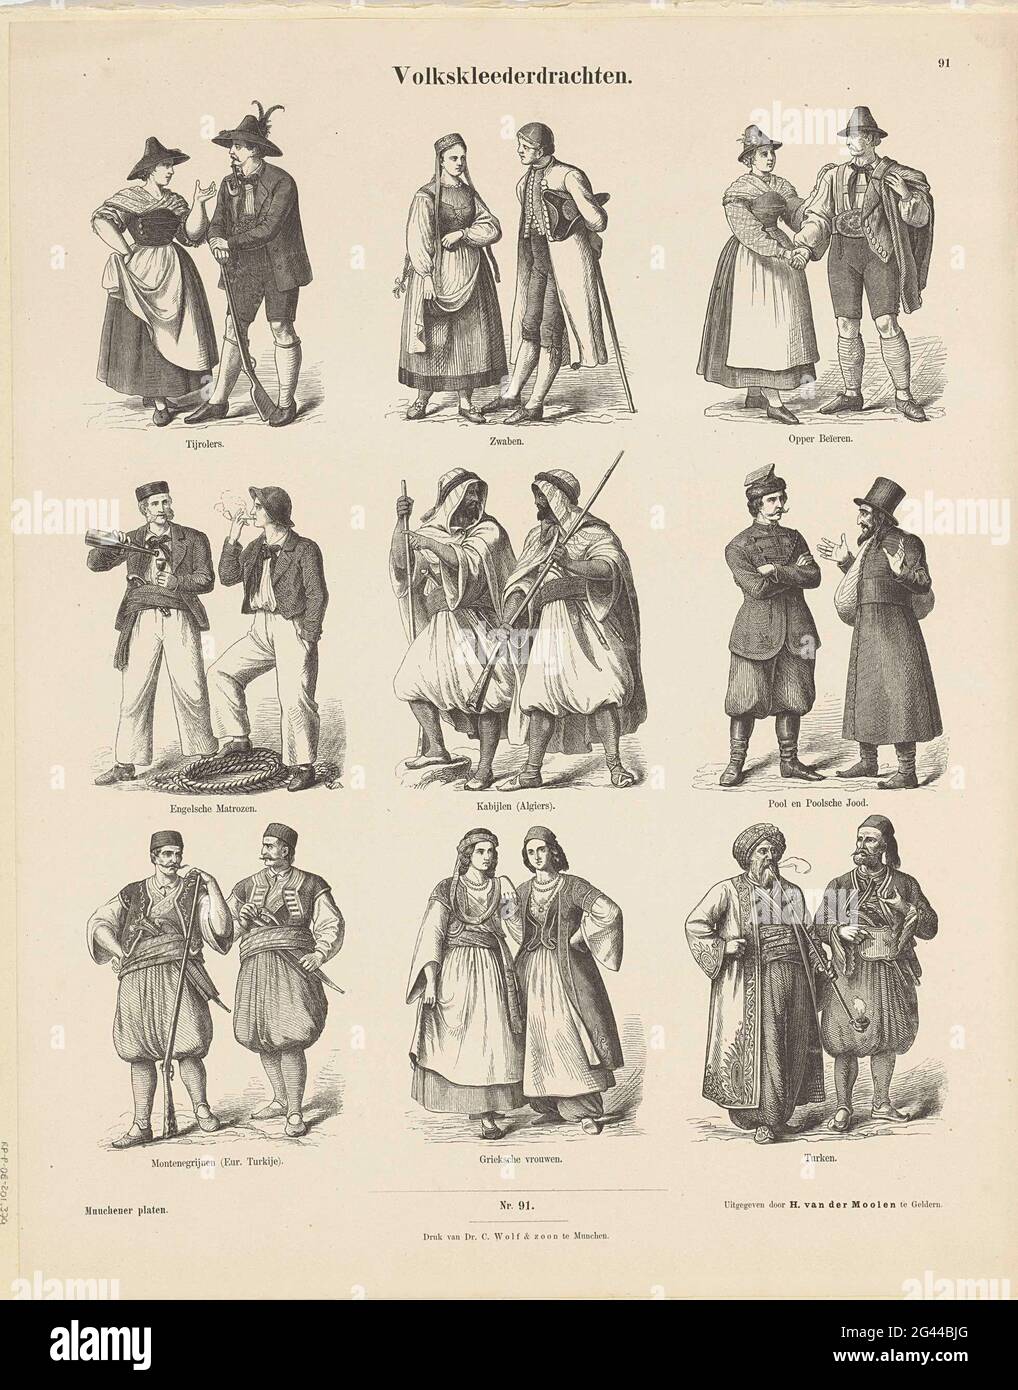 Folk clothing forces; Munchener plates. Leaf with 9 performances of couples  in traditional costumes, including two English sailors, two Greek women and  two Turkish men in traditional clothing. Under the images a